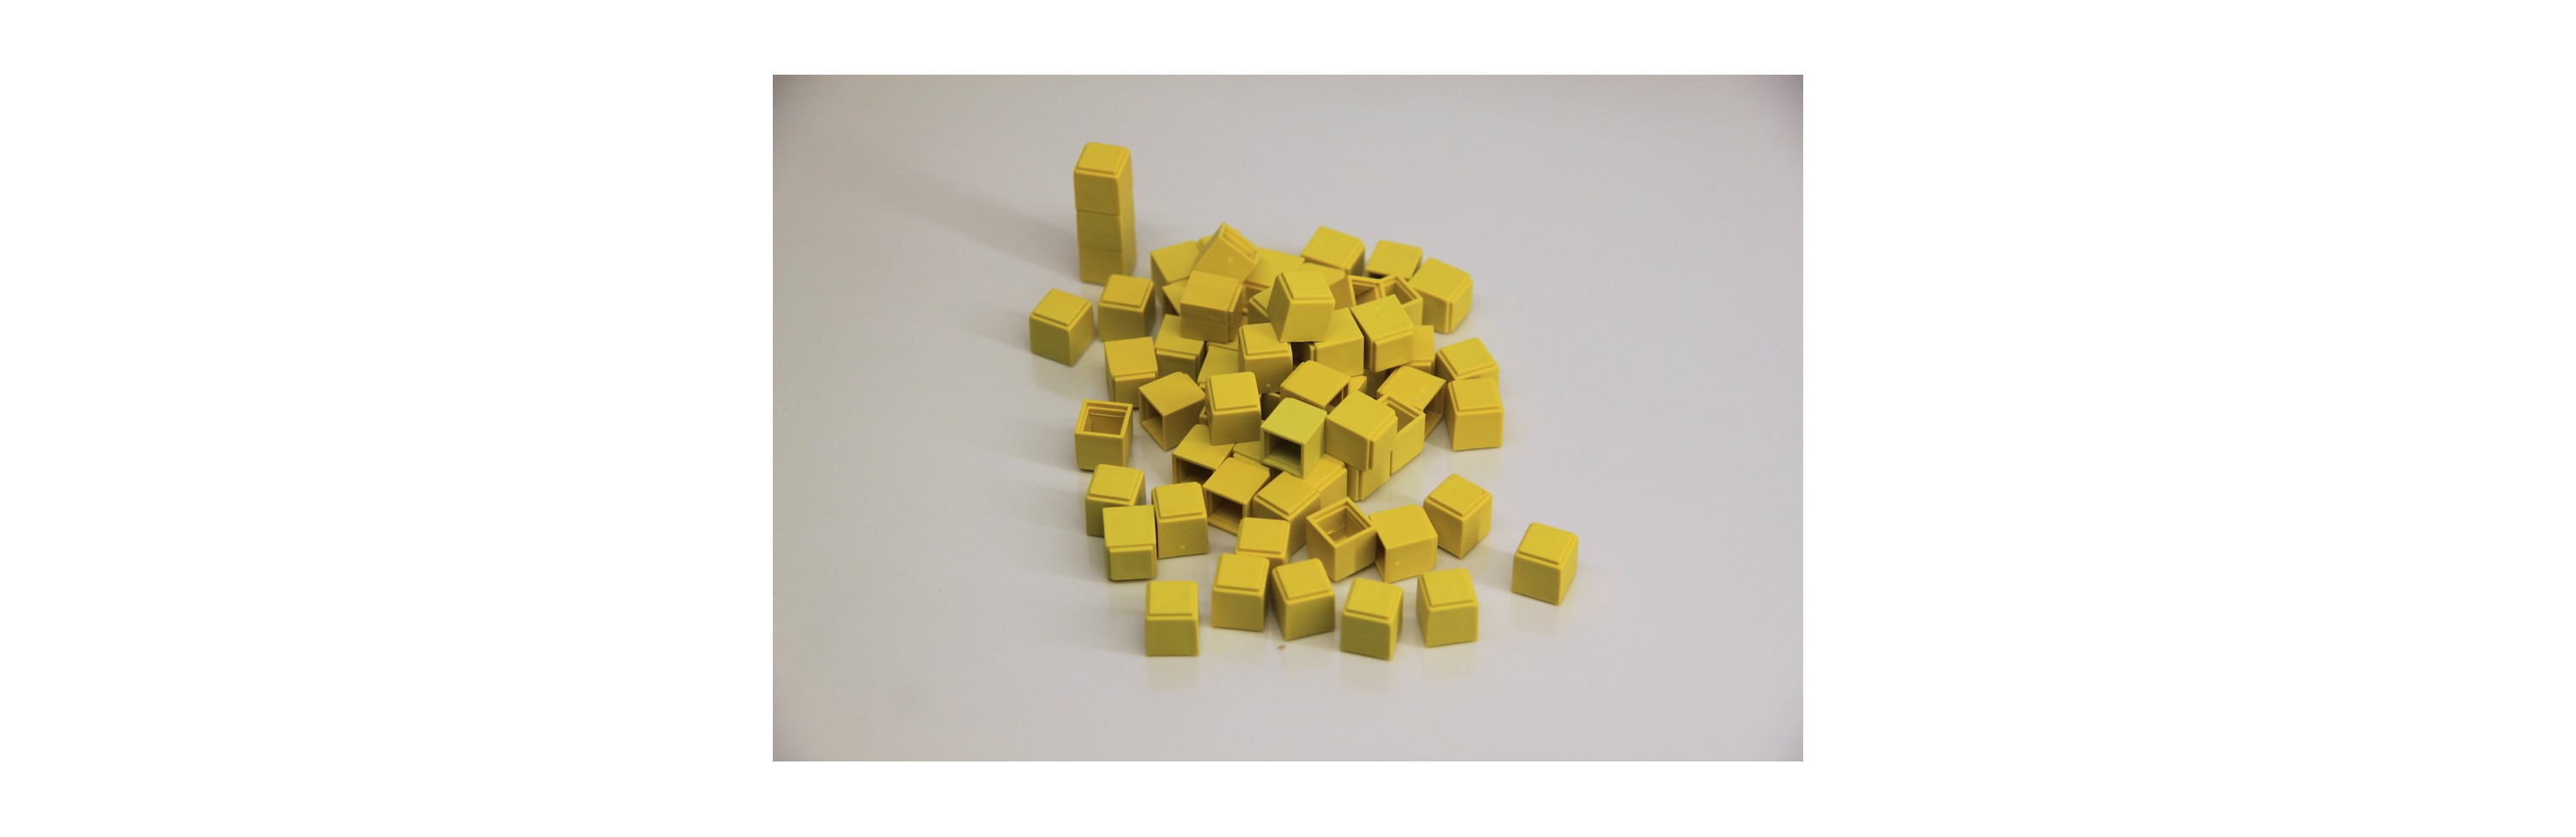 Wissner® active learning - Base Ten Units 100 pcs (yellow) RE-Plastic®